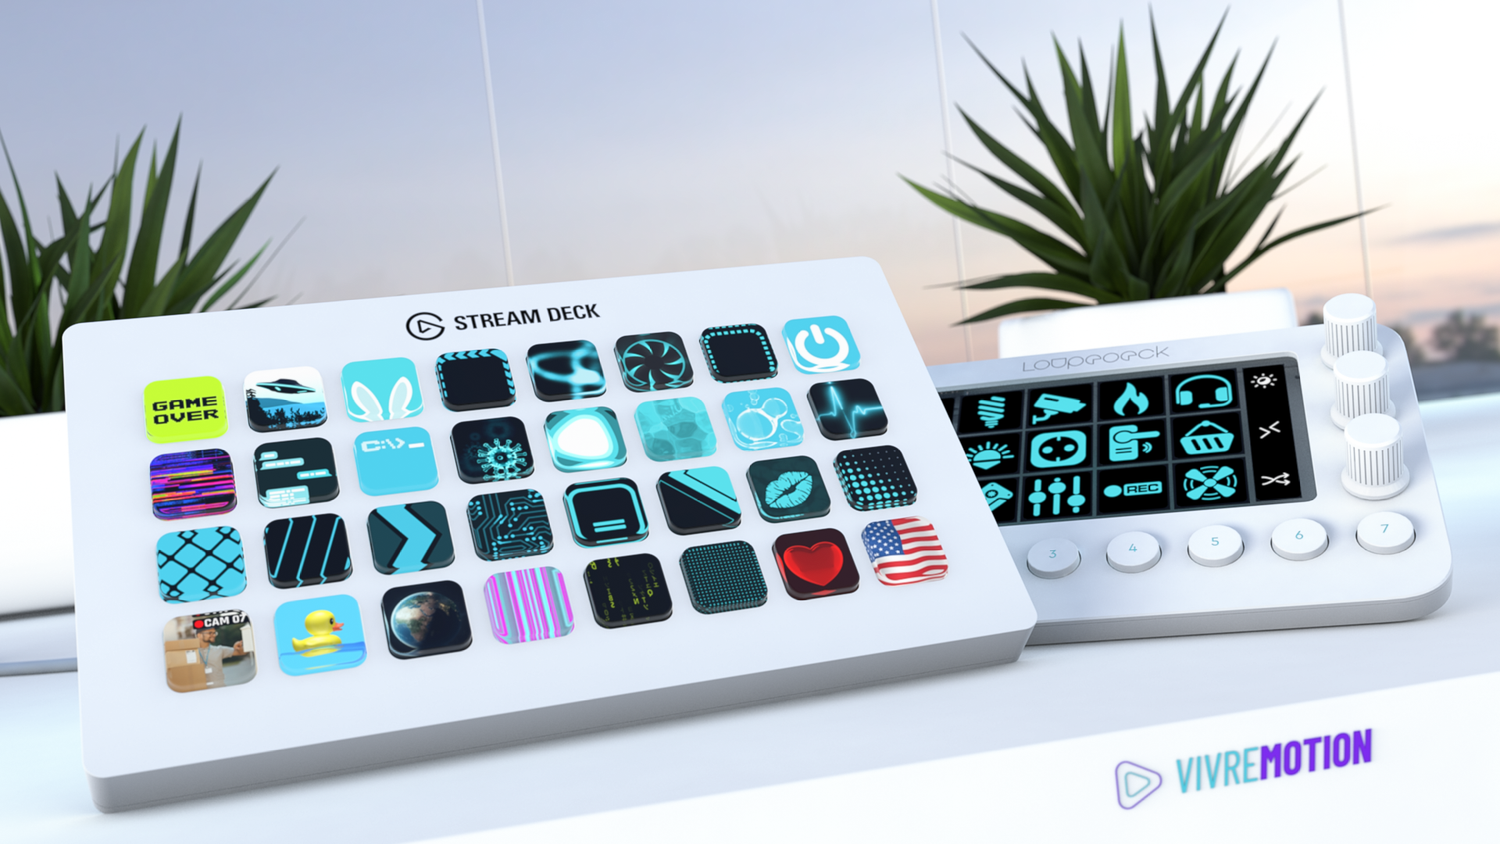 BEAUTIFY YOUR STREAM DECK AND LOUPEDECK AND DISPLAYPAD AND RAZER STREAM CONTROLLER WITH ANIMATED RGB KEY ICONS @ VIVRE-MOTION